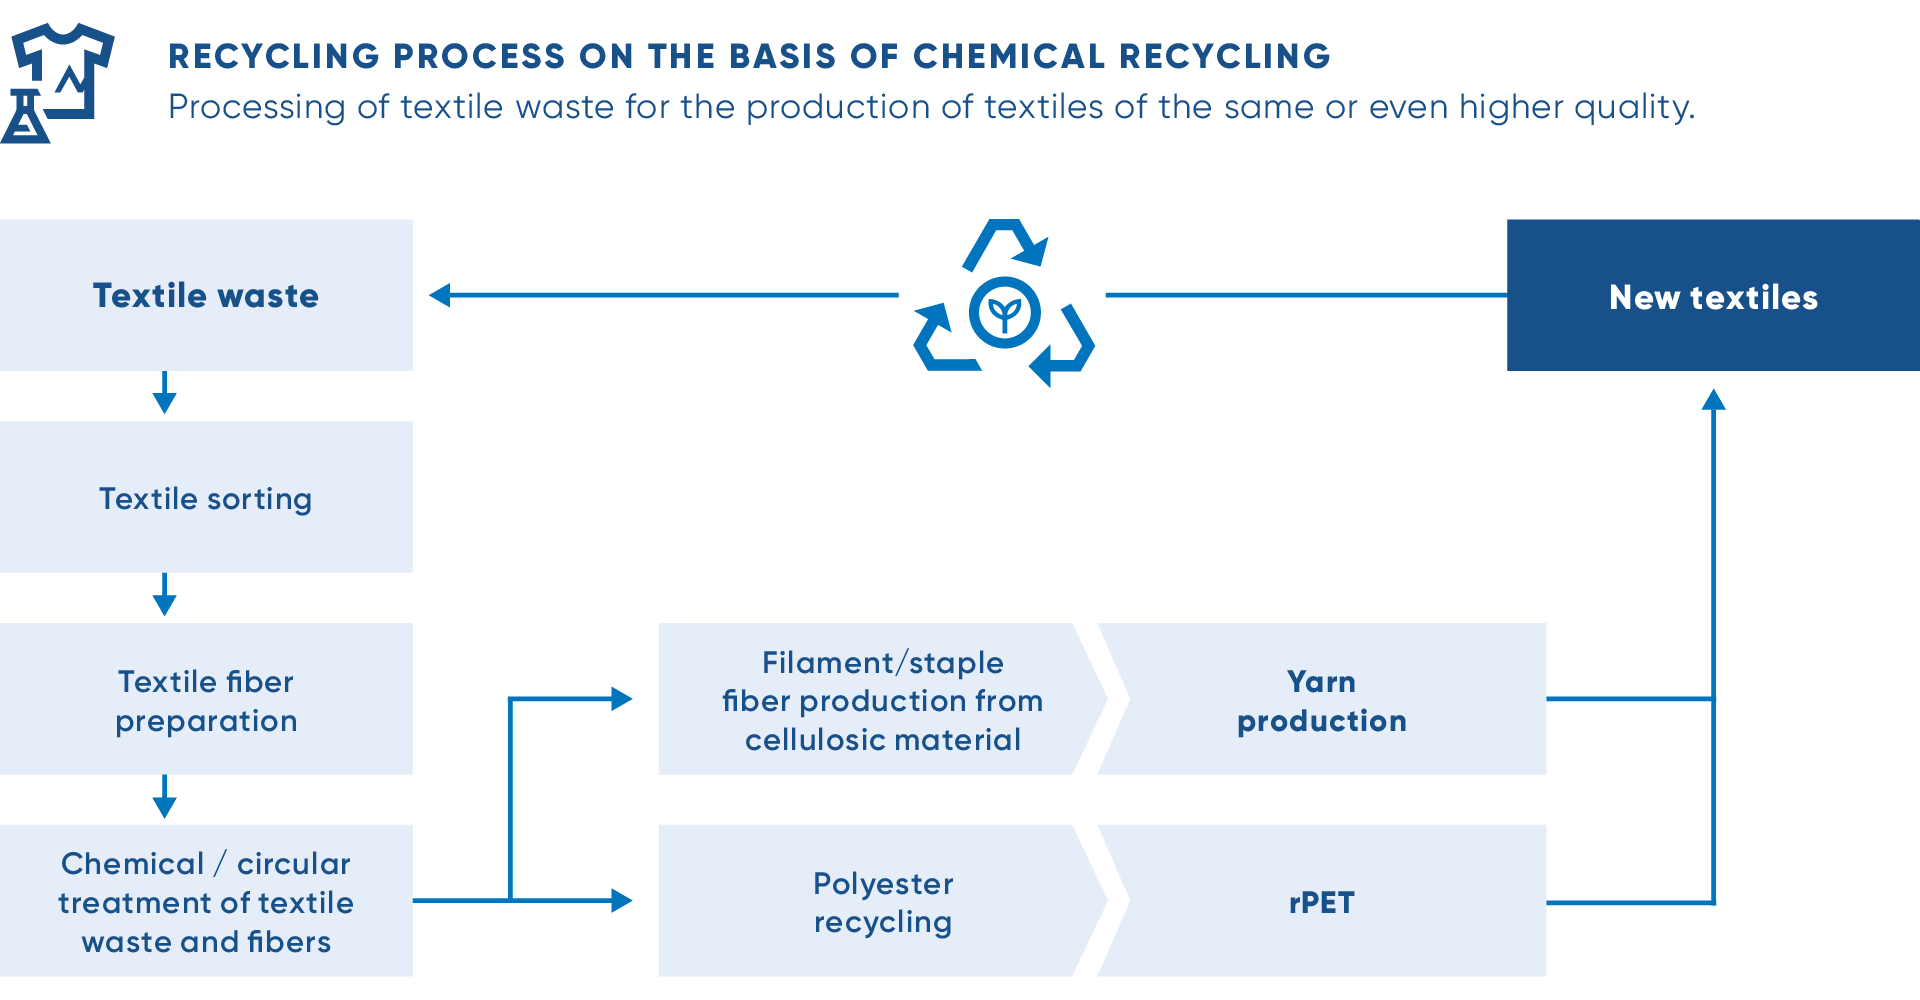 https://www.andritz.com/resource/blob/502342/32cd249234ed81c112d13aa73afc2930/picture1-recyclingproecess-chemical-recycling-recycling-data.png